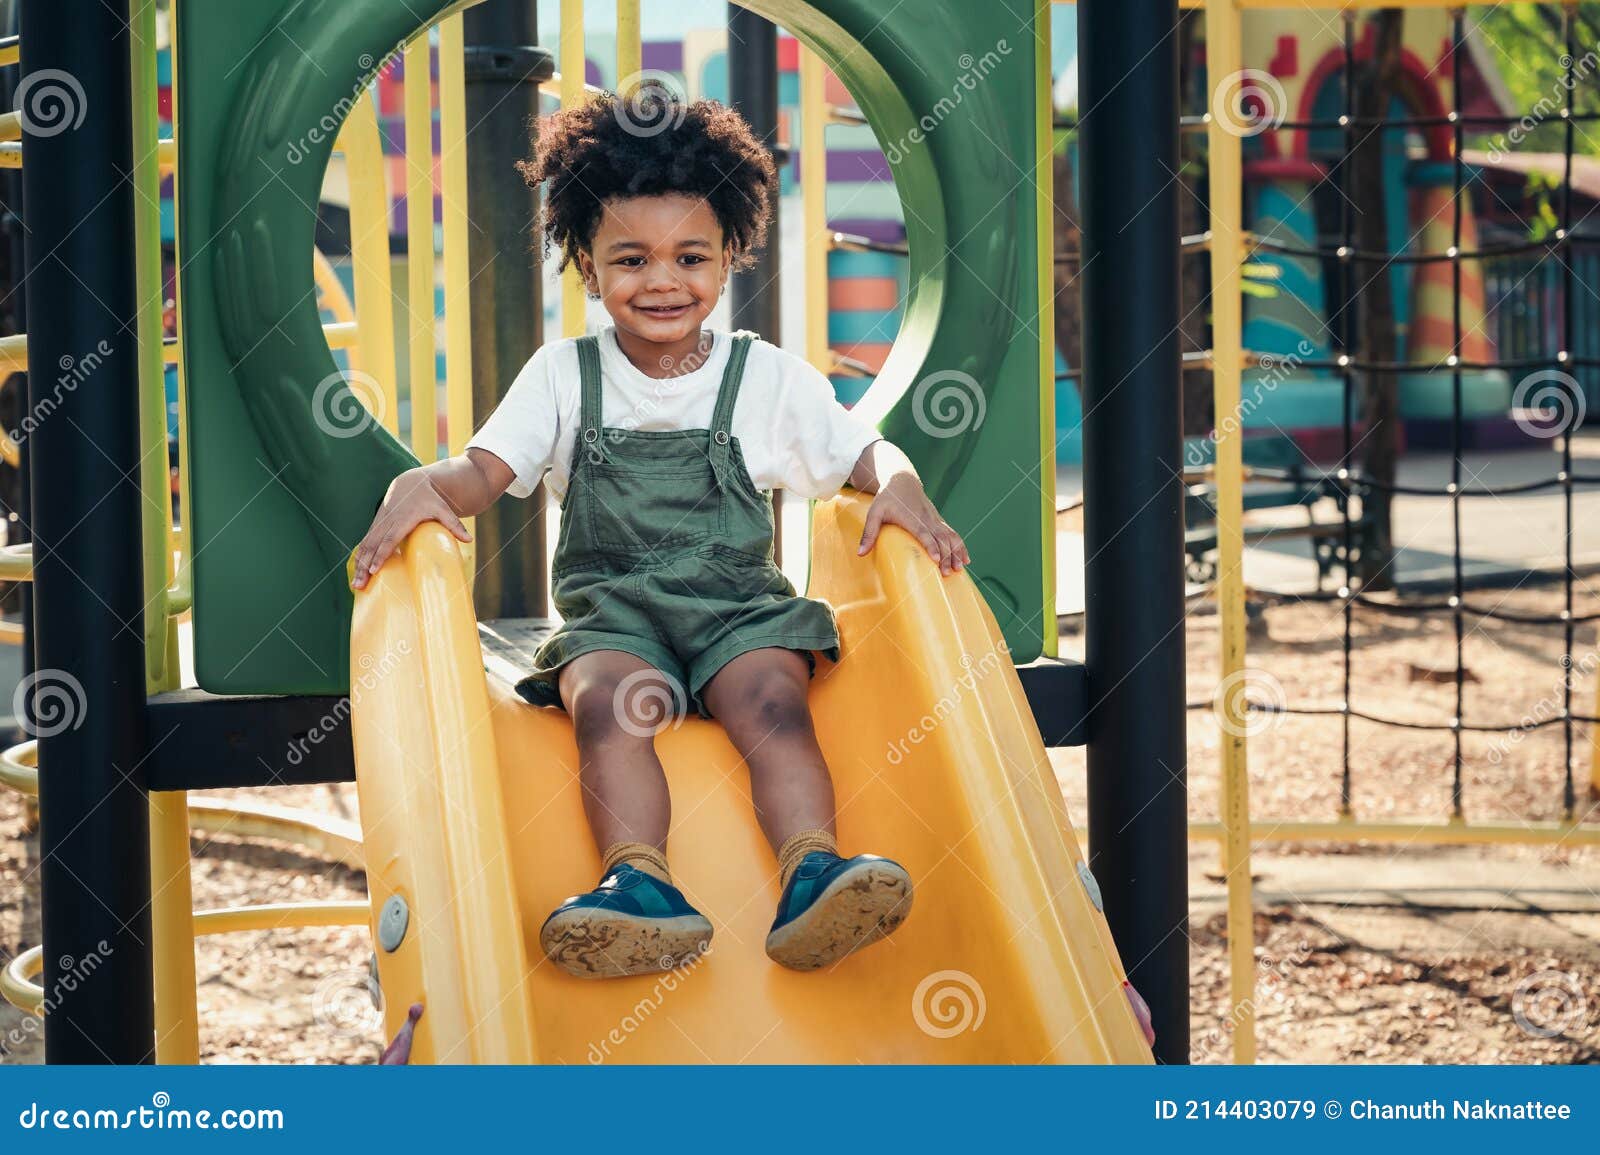 Happy Black People Child Playing Slide In Playground Royalty Free Stock